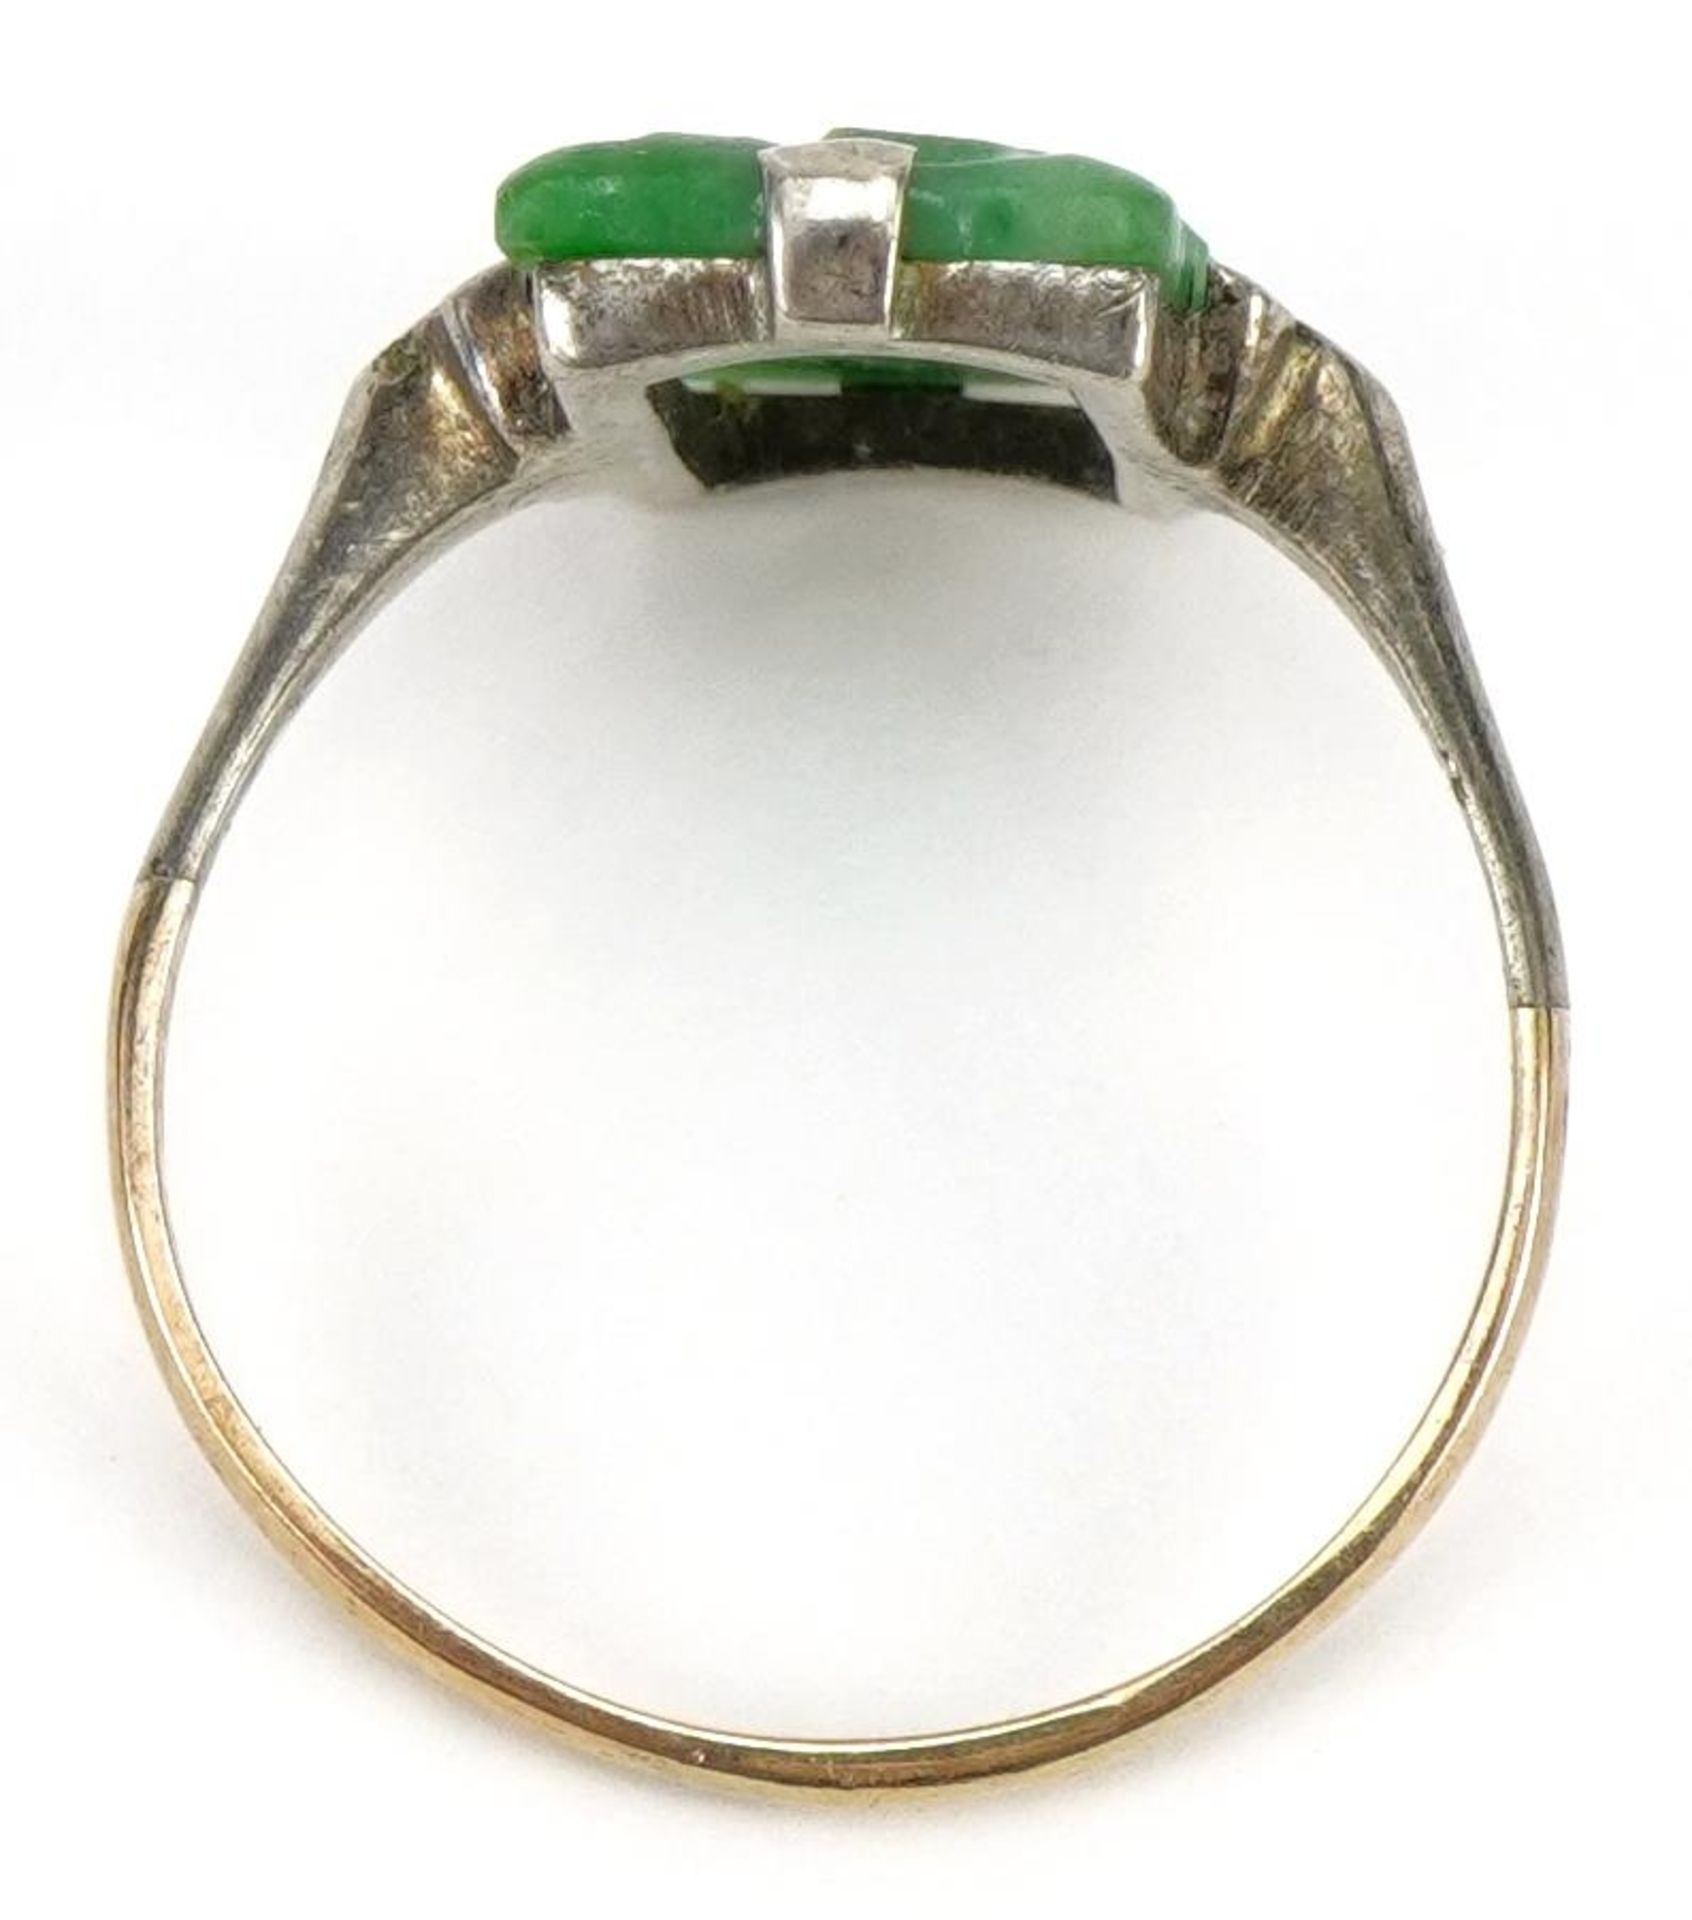 9ct gold and silver carved jade ring, the jade approximately 13.7mm x 9.1mm, size Q/R, 2.8g : For - Image 3 of 4